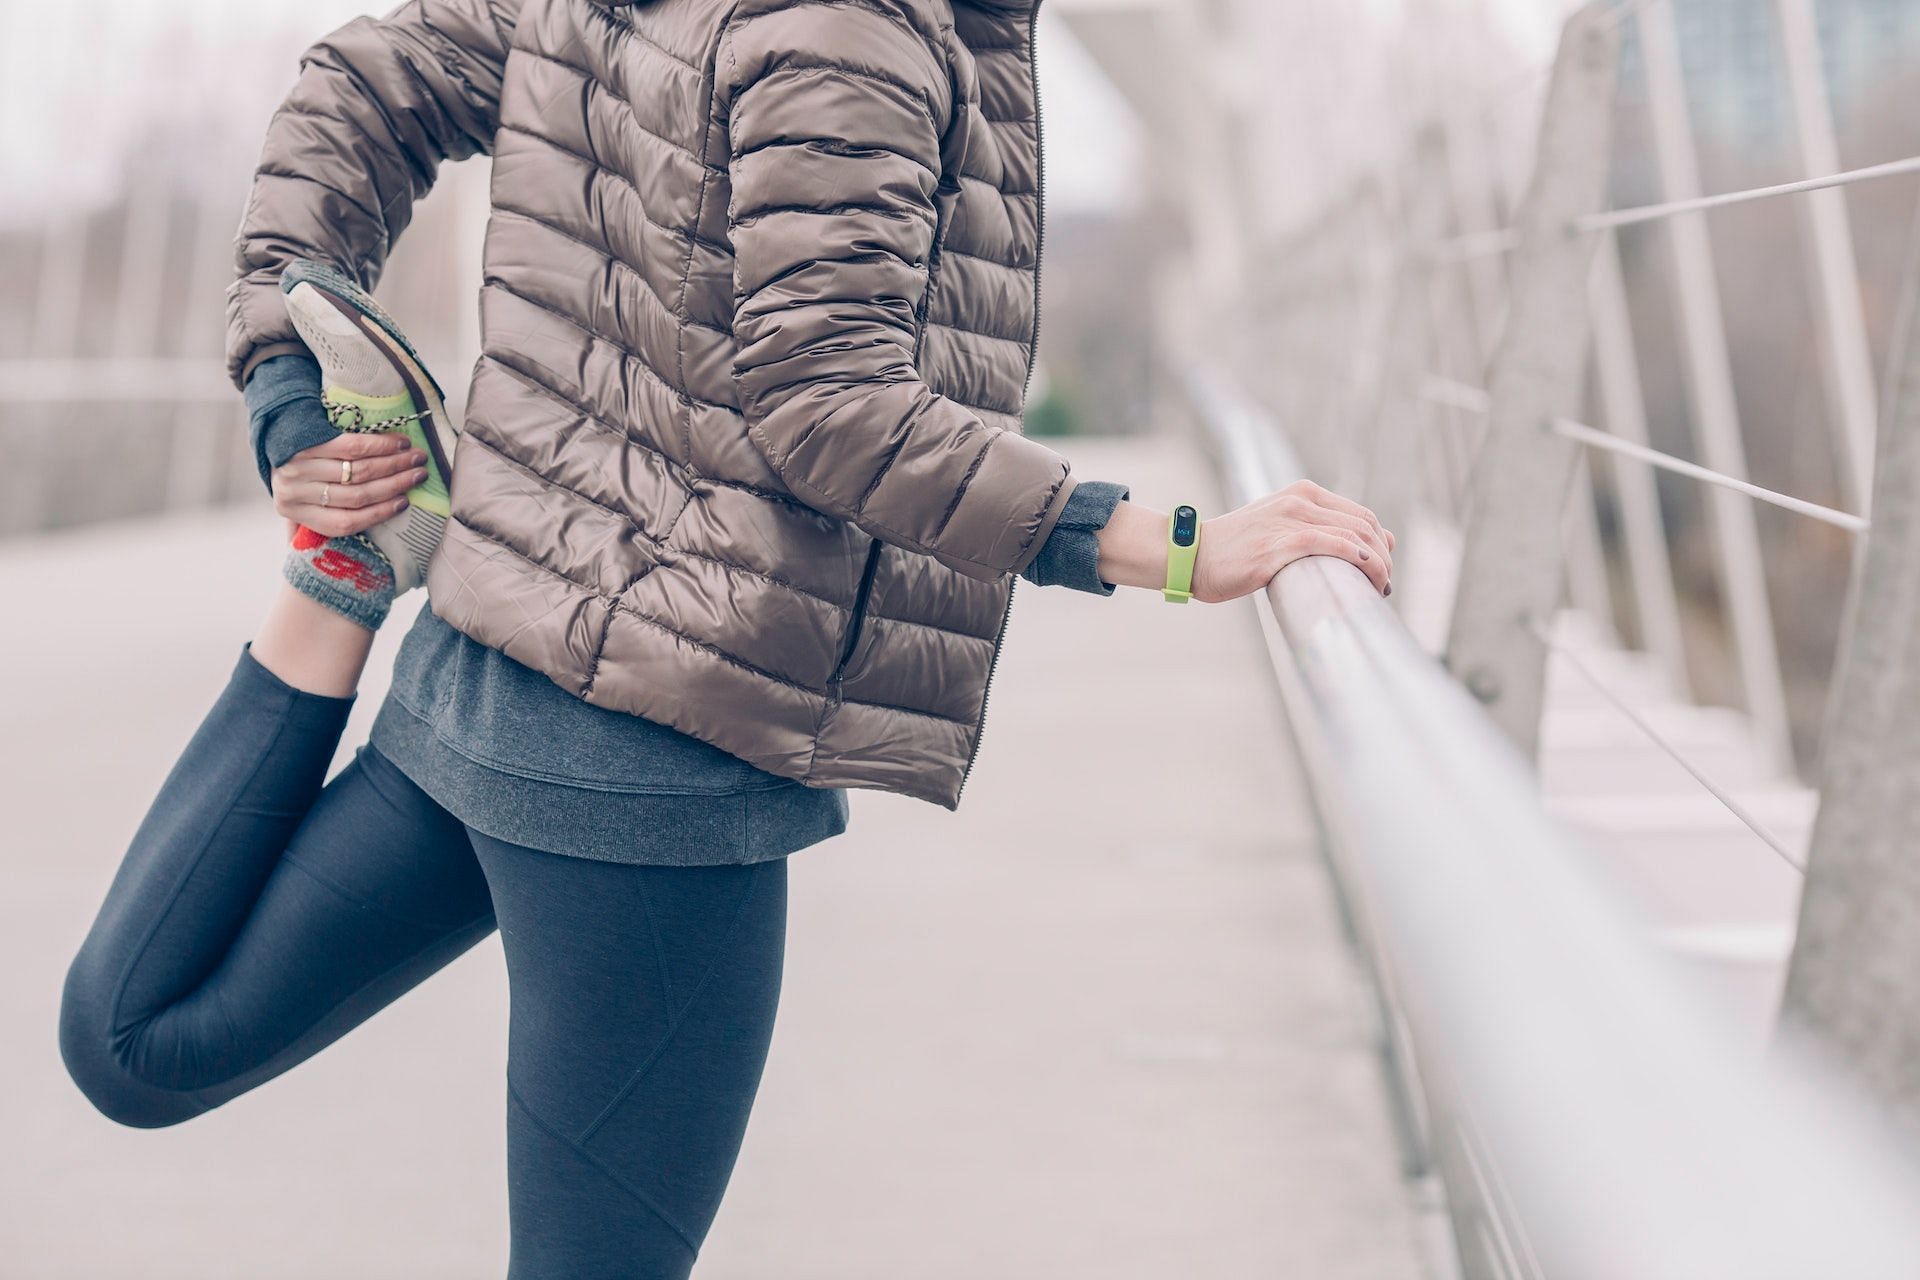 Stretching the quads before running can activate the muscles. (Photo via Pexels/Burst)